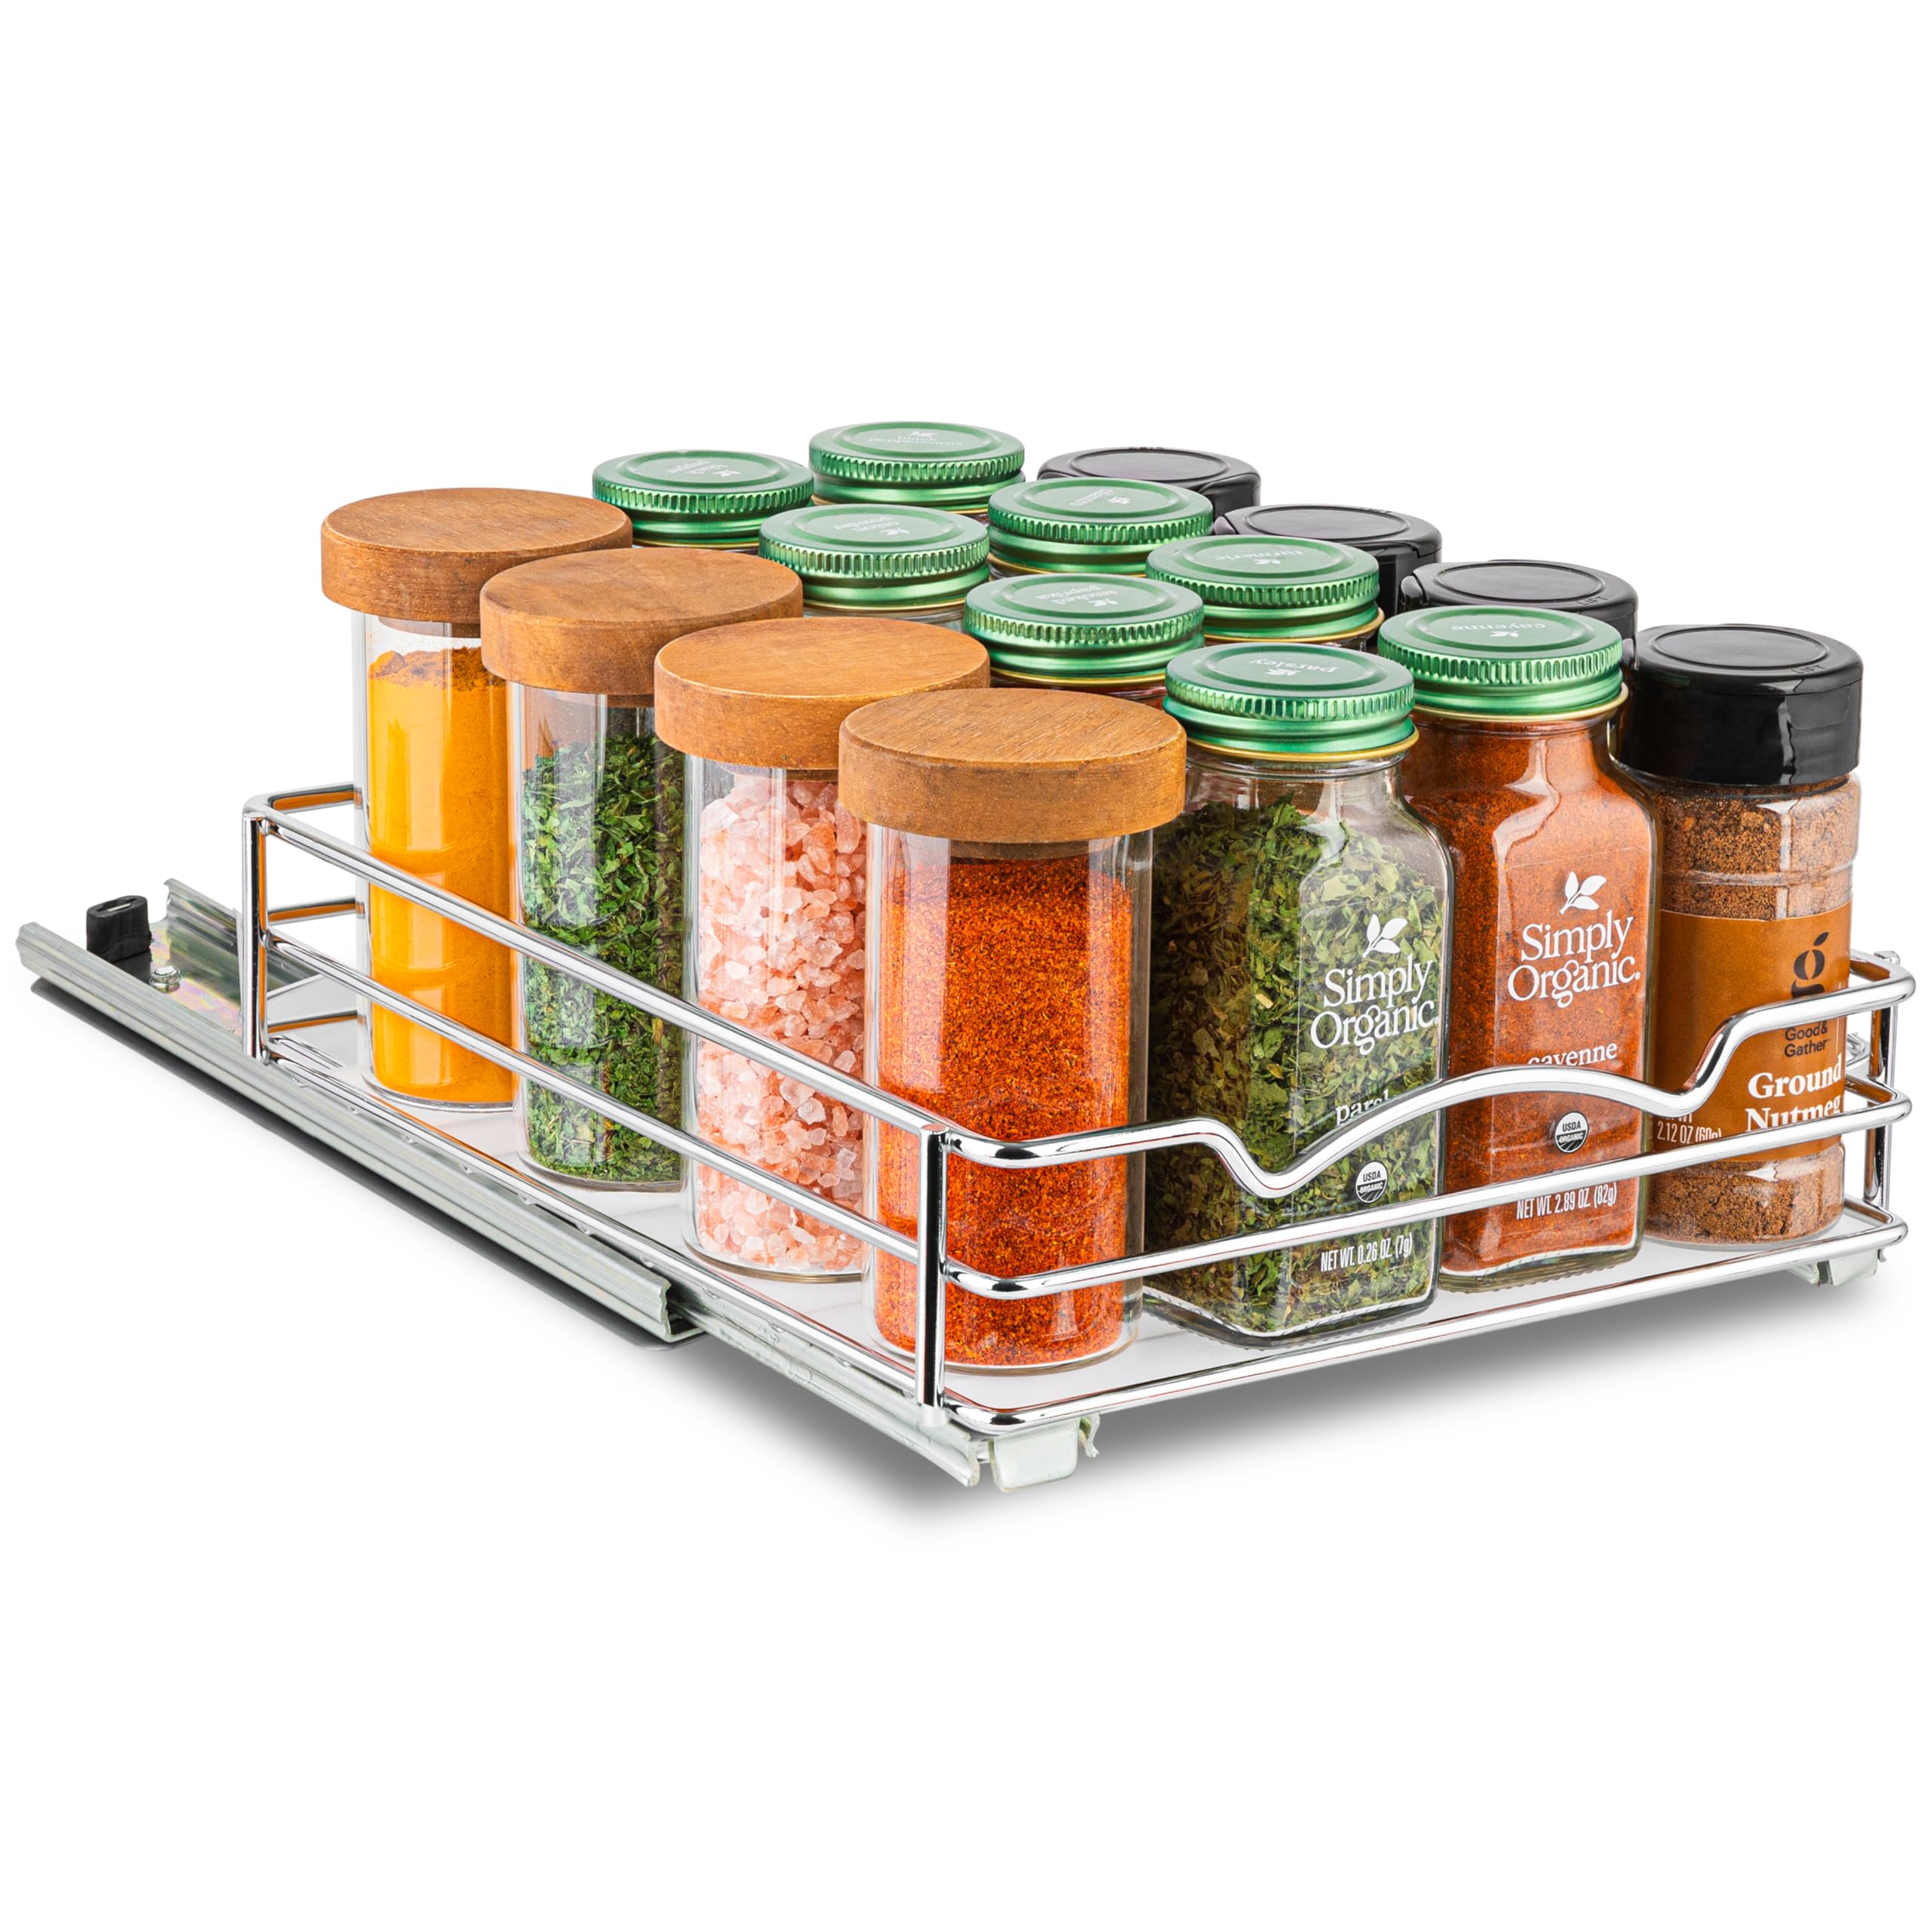 HOLD N' STORAGE Premium Pull-Out Spice Rack - 8-3/8"W x 10"D - Anti-Rust Chrome Finish - Heavy Duty with 5-Year Limited Warranty- Fits 4 Rows of Standard Spice Jars  - Like New